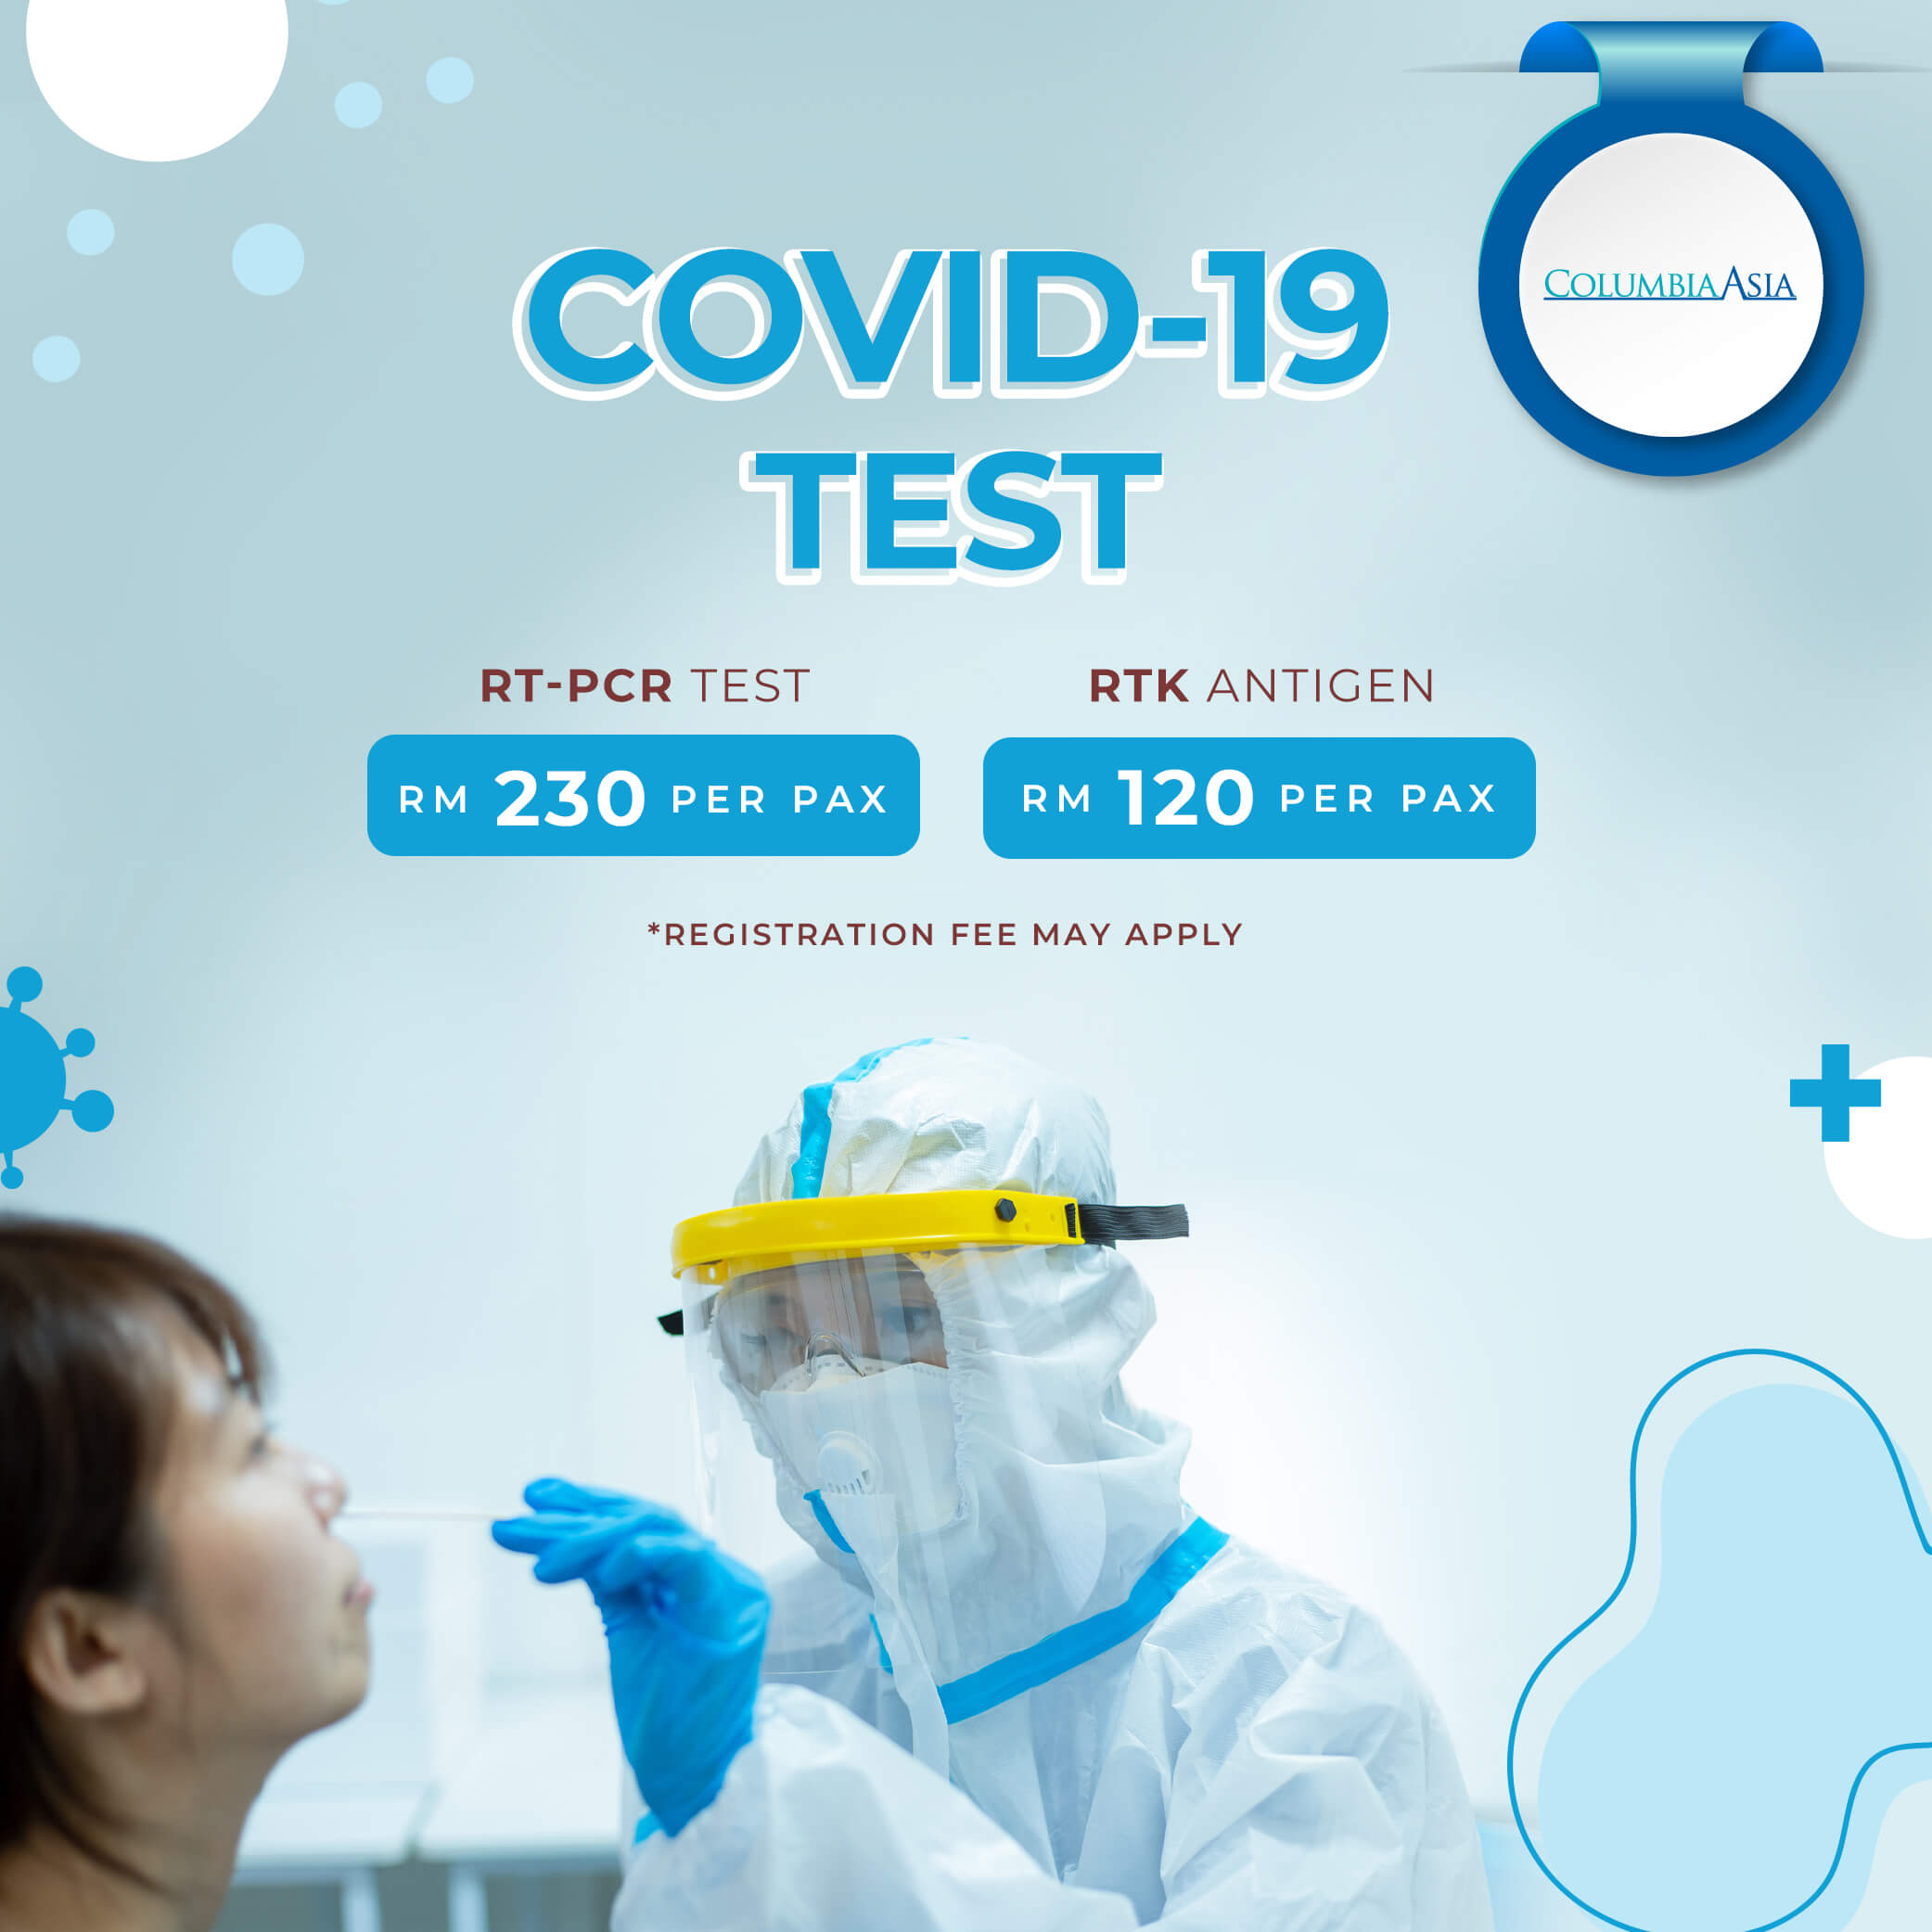 Covid-19 RT- PCR & RTK Test in Columbia Asia